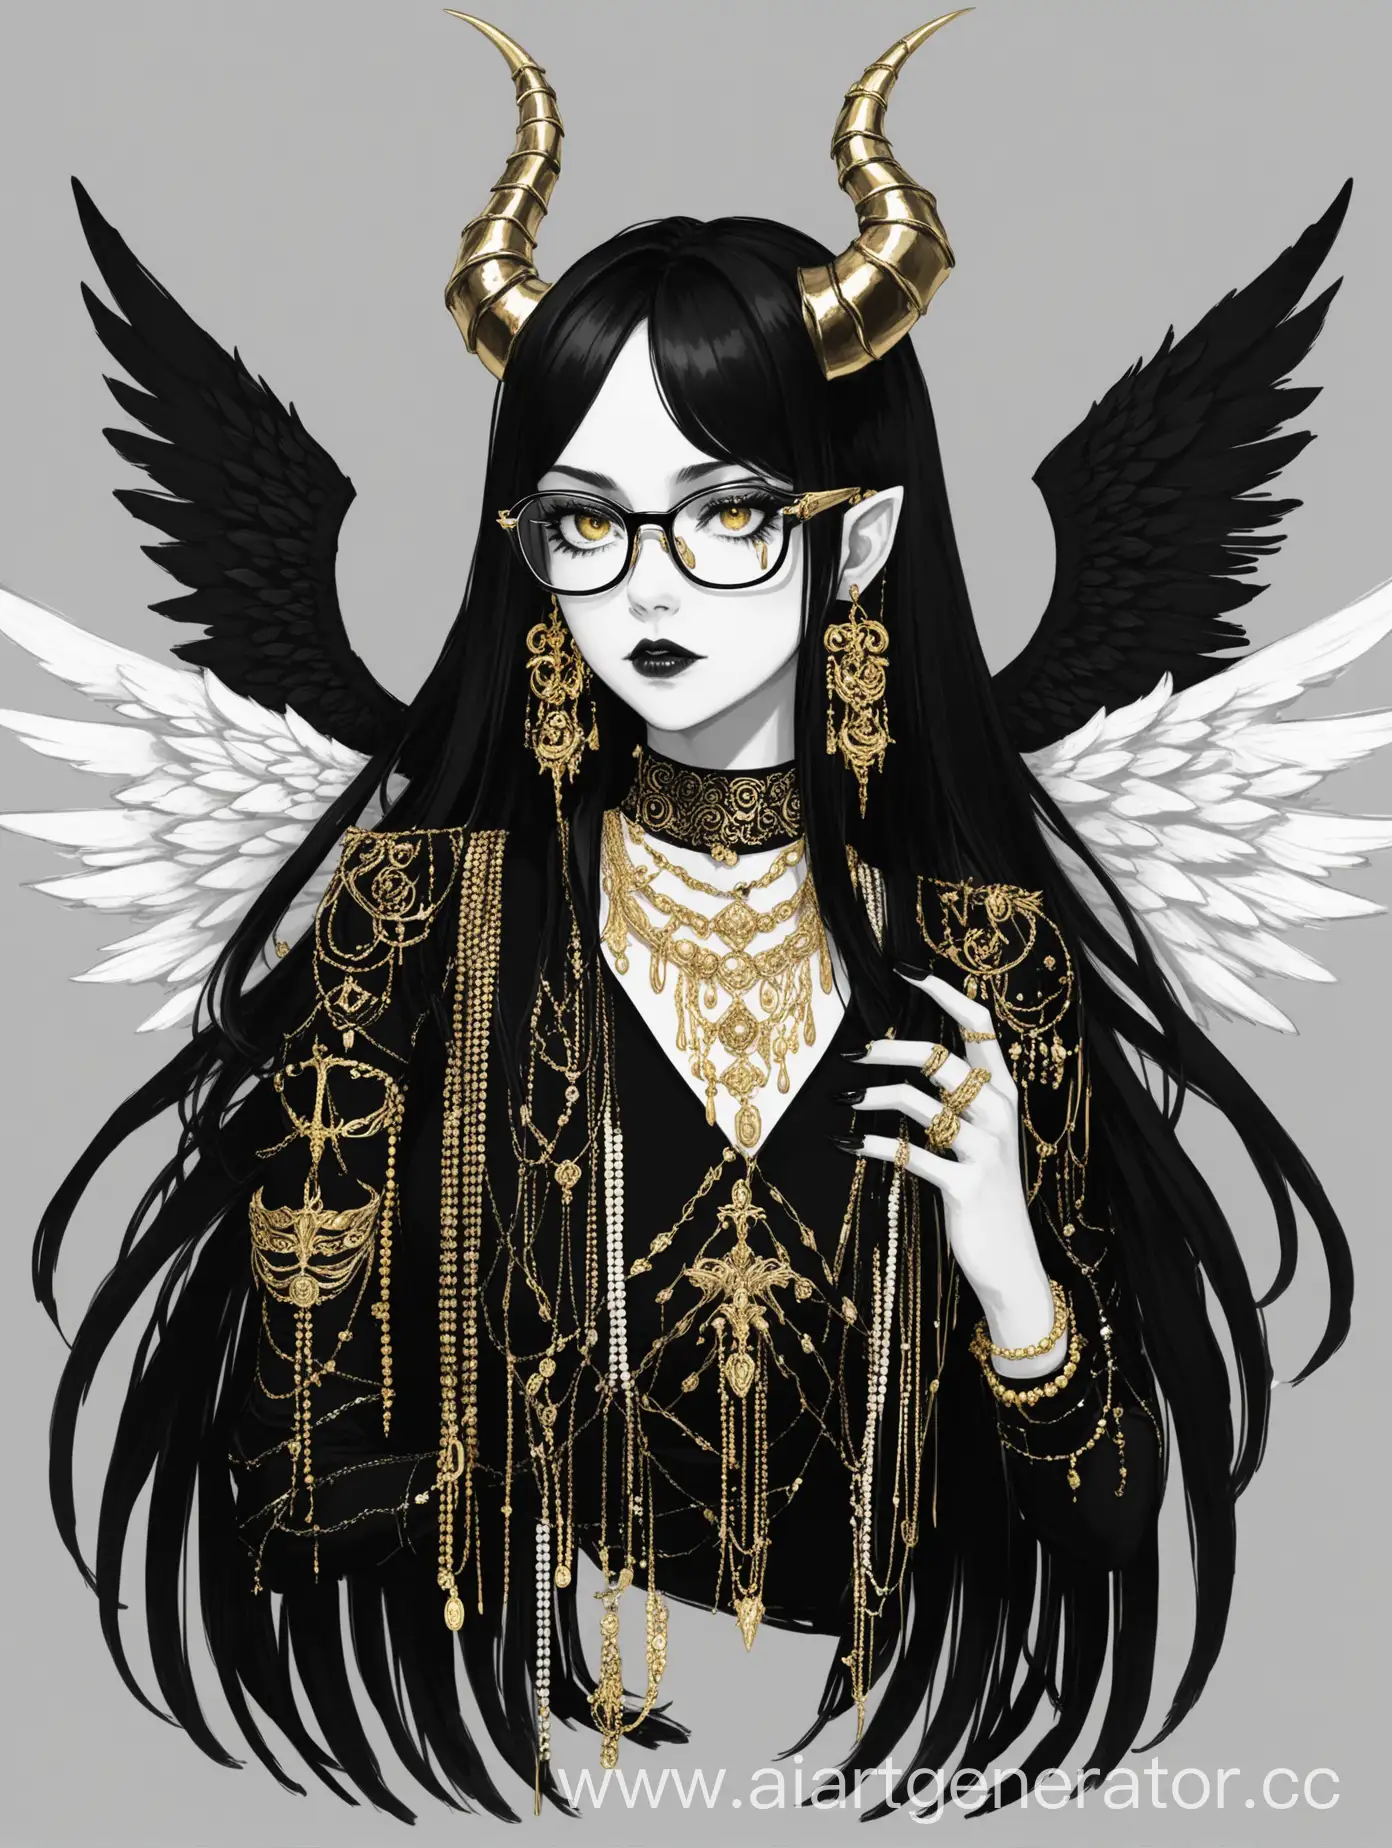 Elegant-Woman-with-Horns-and-Wings-Sophisticated-Black-and-White-Palette-with-Luxurious-Gold-Accents-and-Ornate-Jewelry